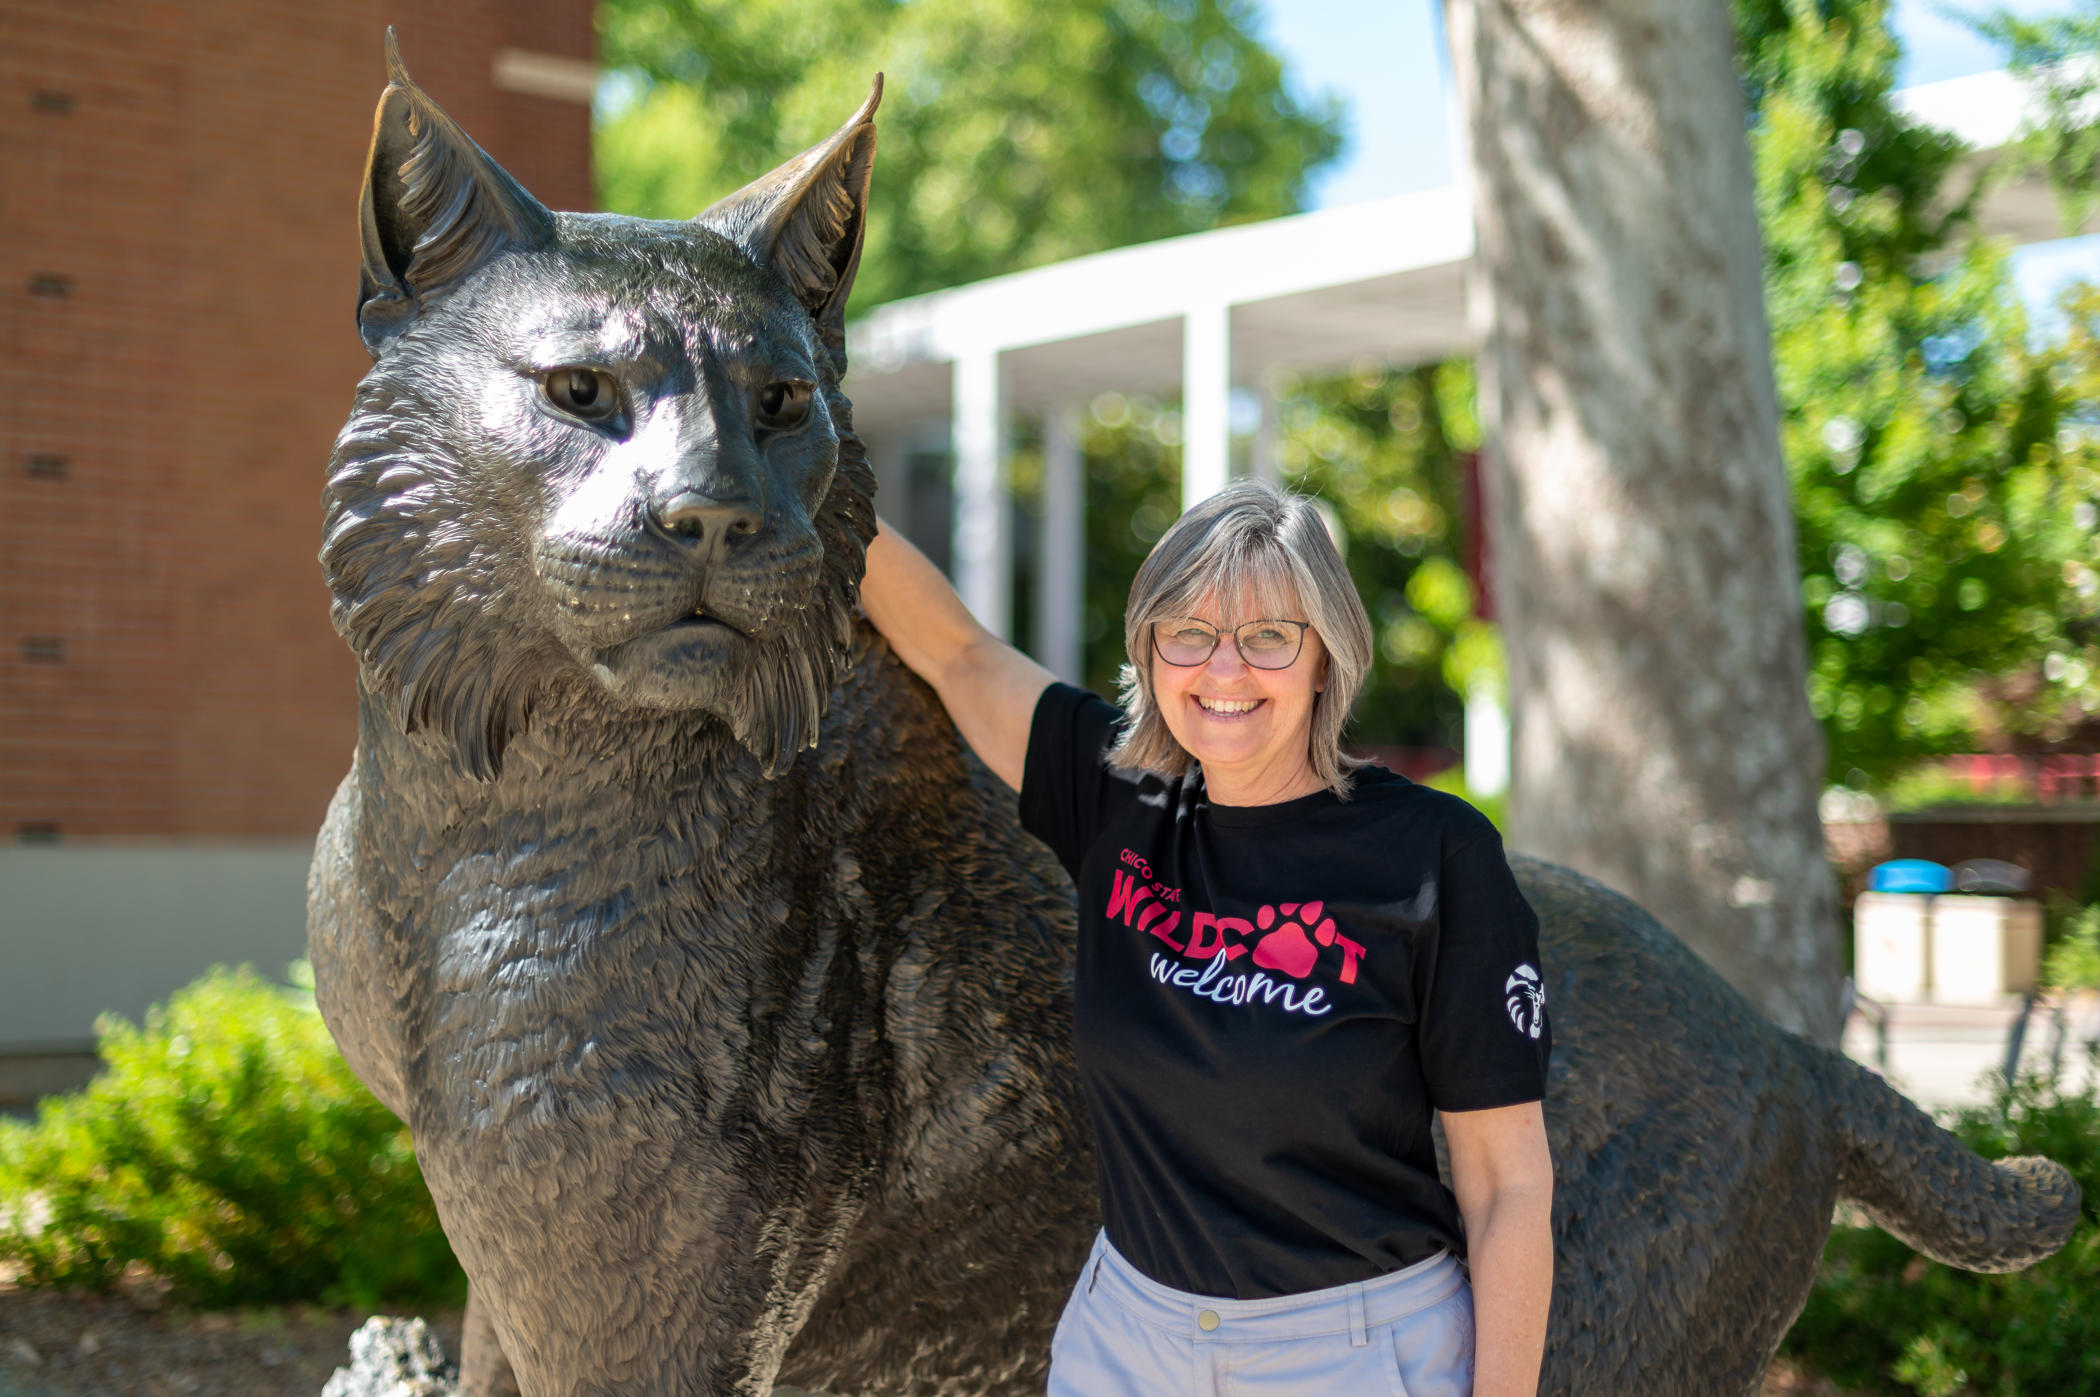 Rosemary White stands with an arm around the Wildcat Statue in Wildcat Plaza